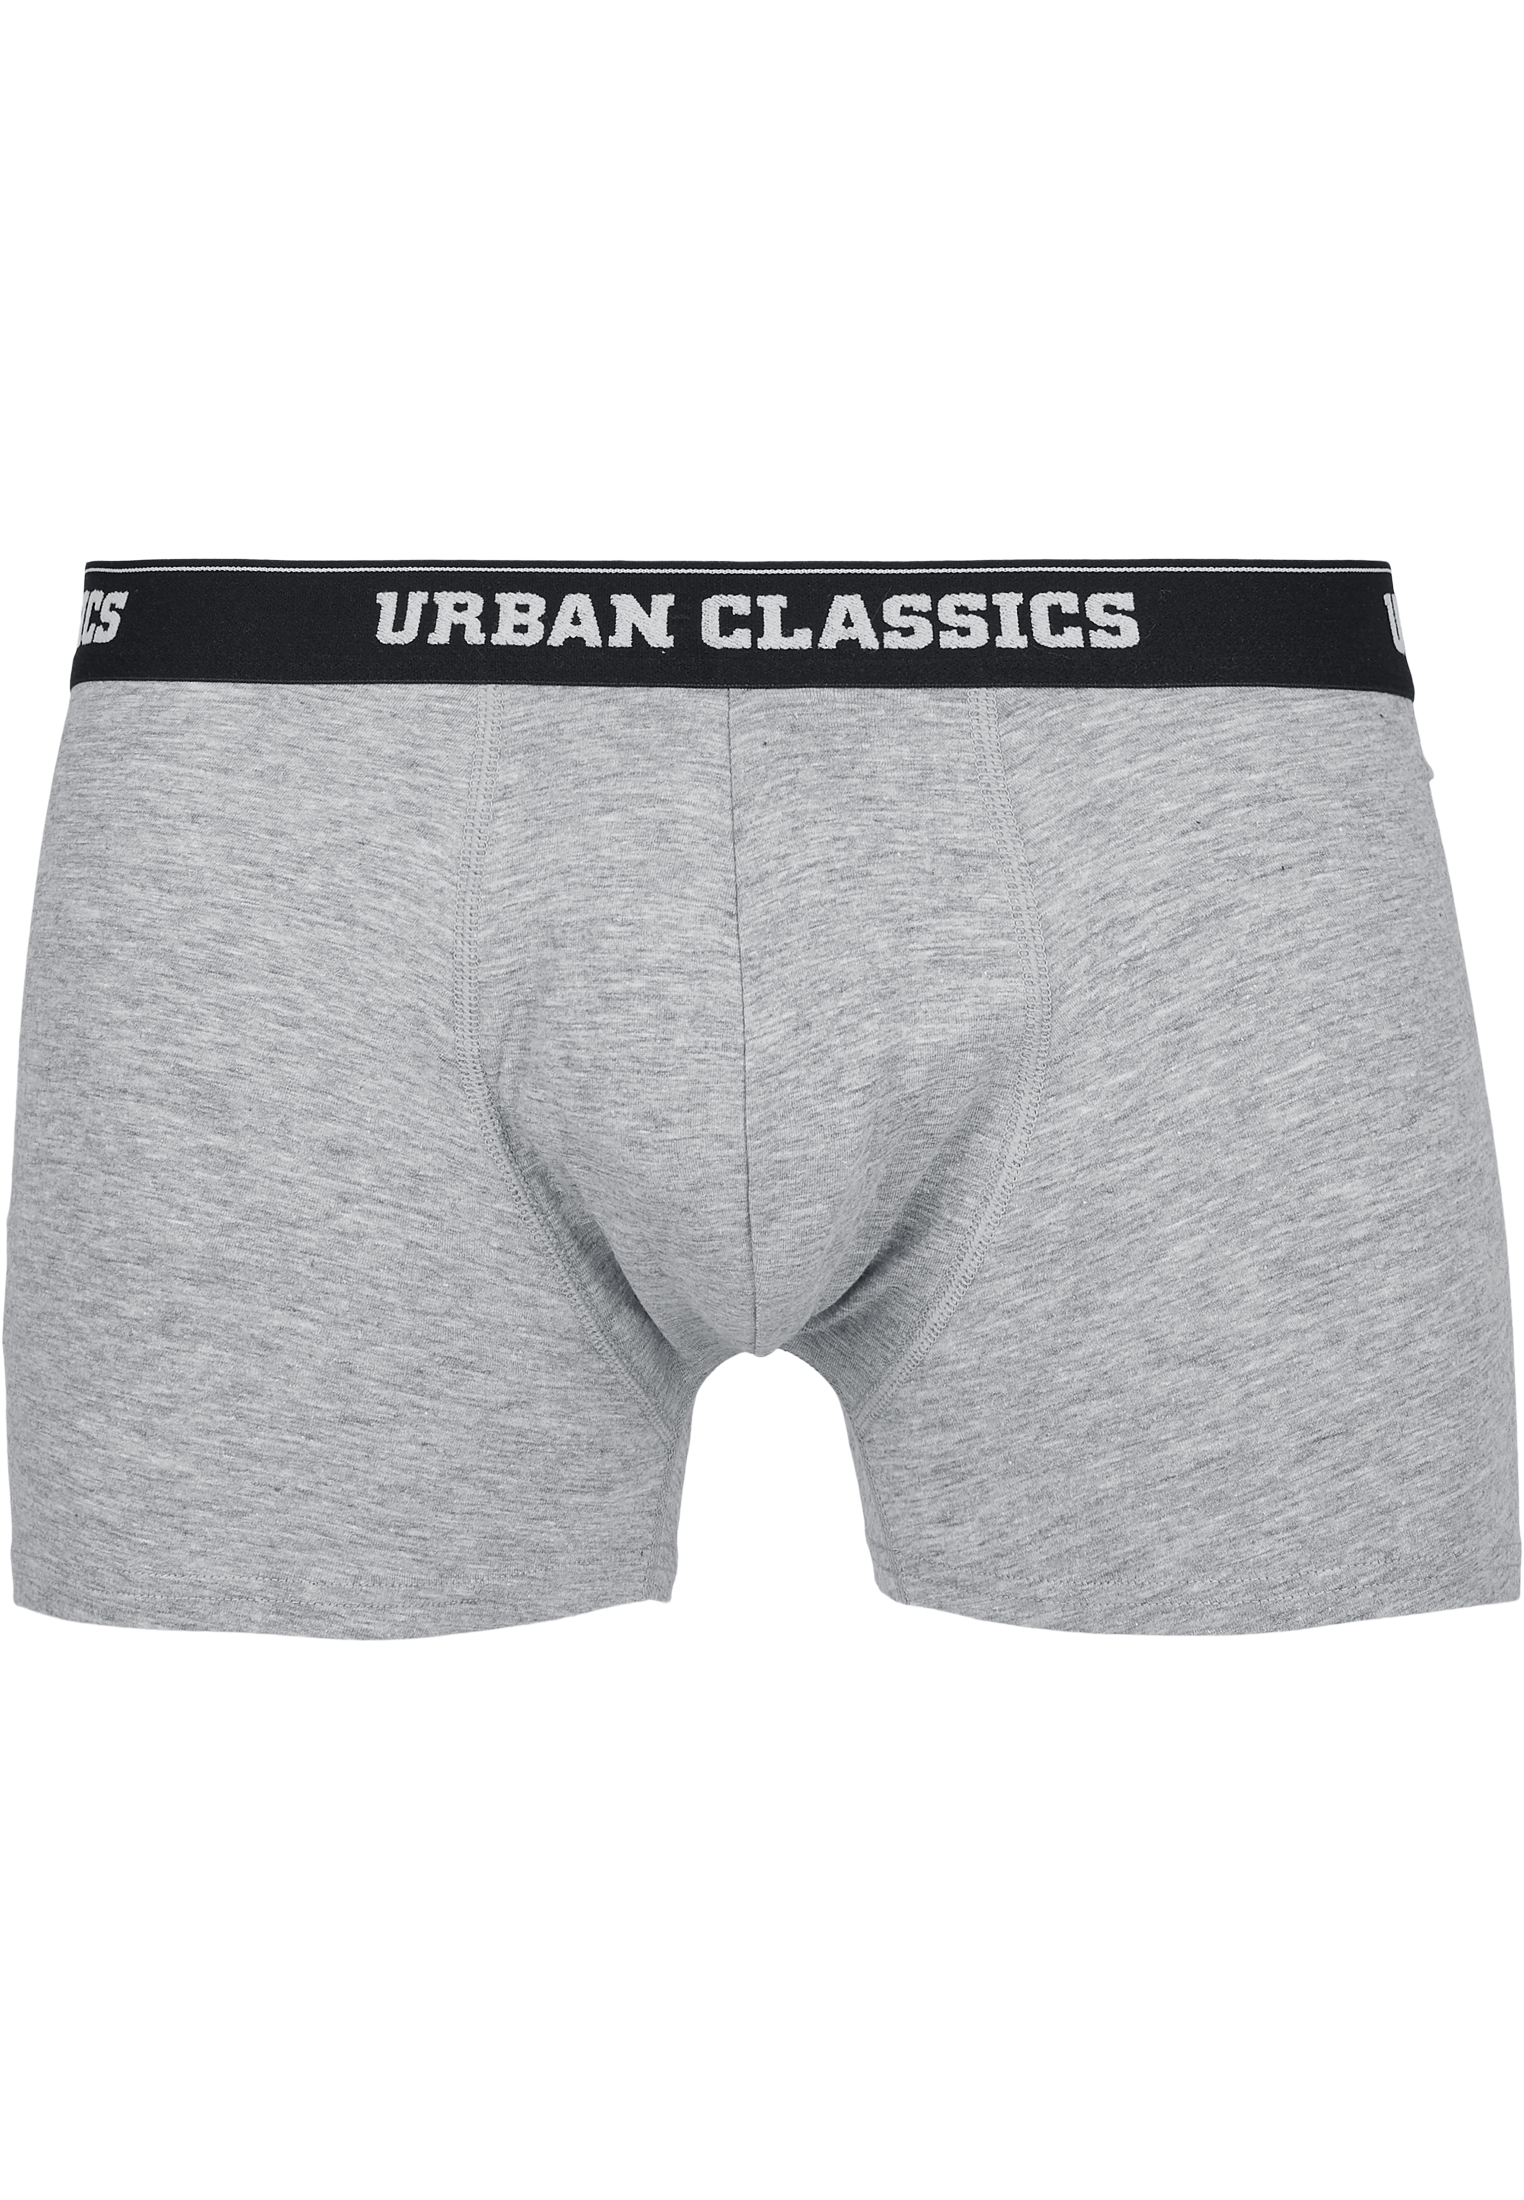 Underwear Men Boxer Shorts Double Pack in Farbe grey+branded aop